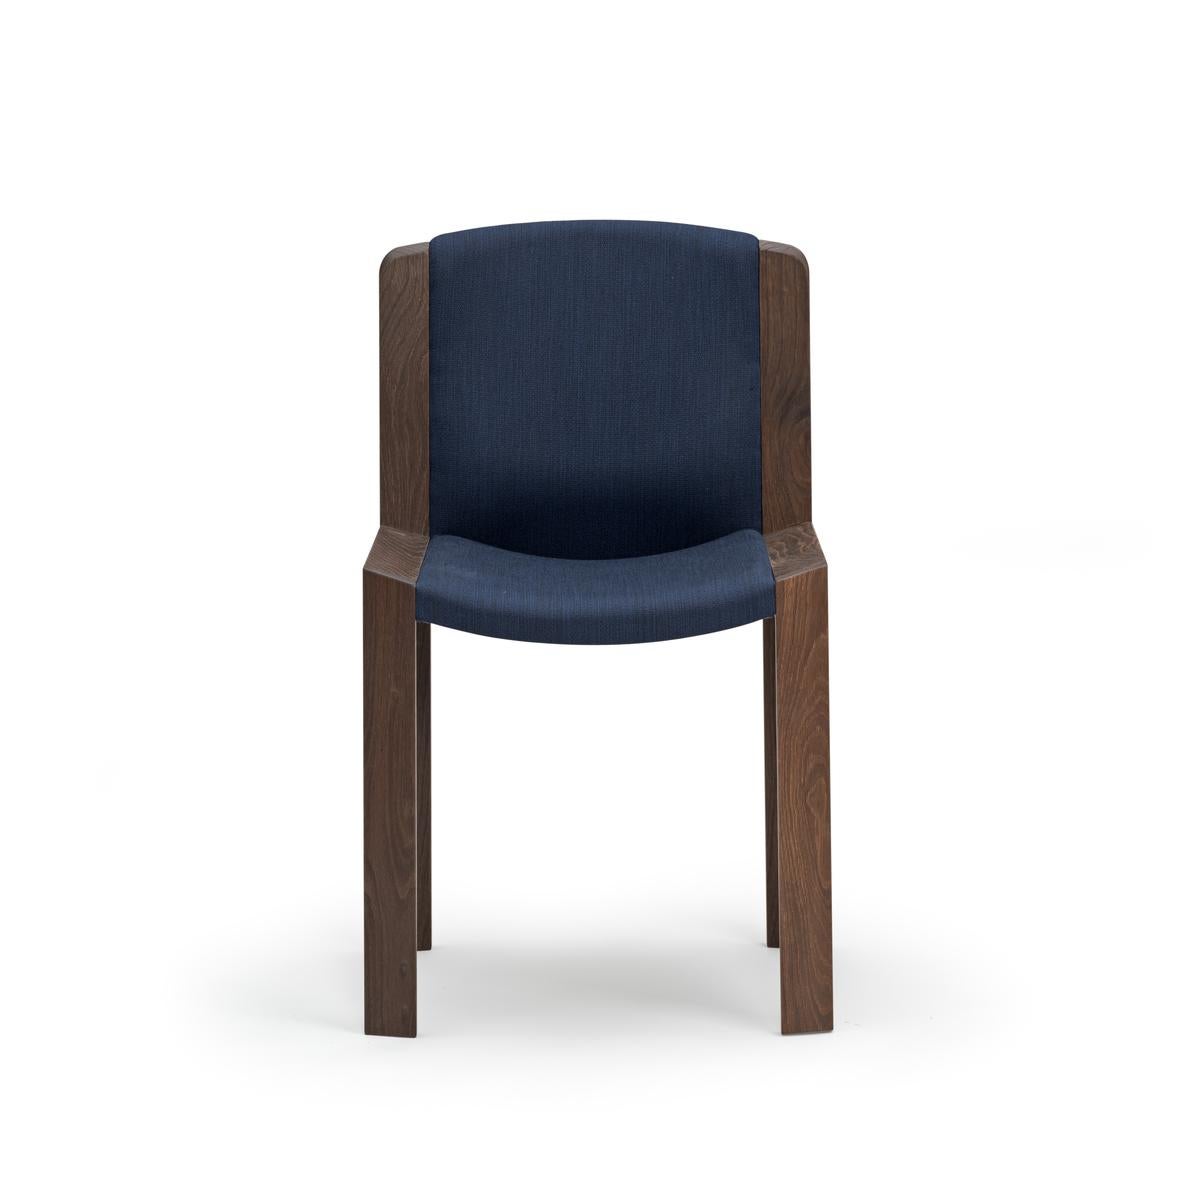 Joe Colombo 'Chair 300' Wood and Sørensen Leather Chair by Karakter 7